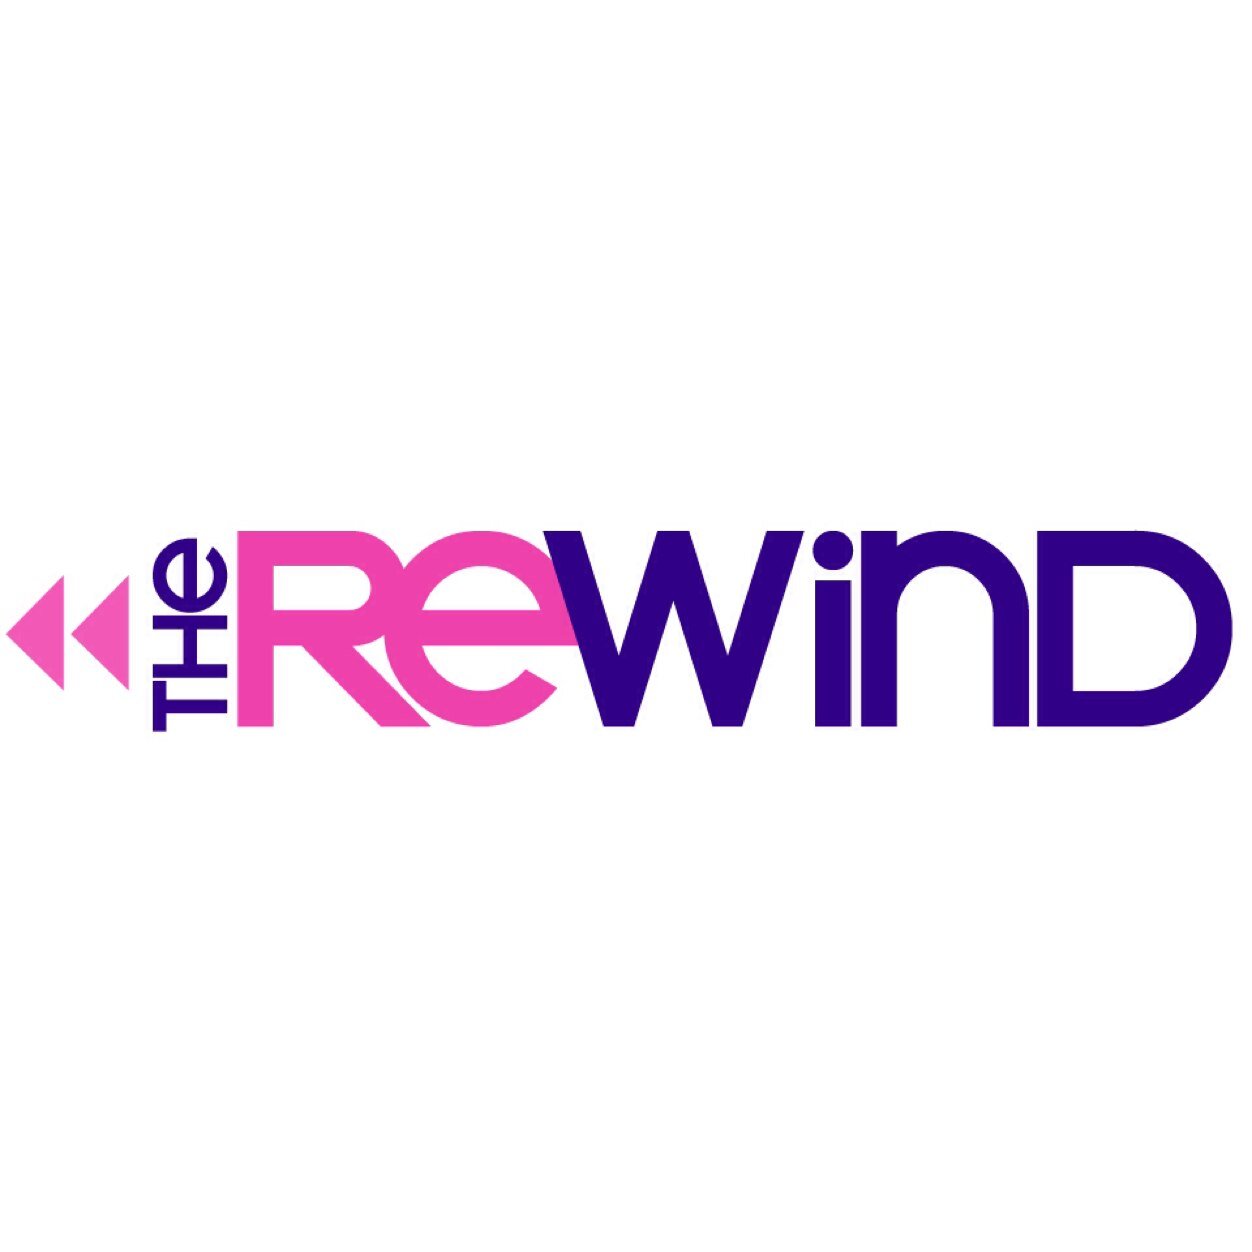 The Rewind Grand Opening Sunday April 27th 2014 inside Mission Tobacco Lounge in Riverside CA. Let The Sunday Funday Begin. 1-7pm 21+ (ladies free)